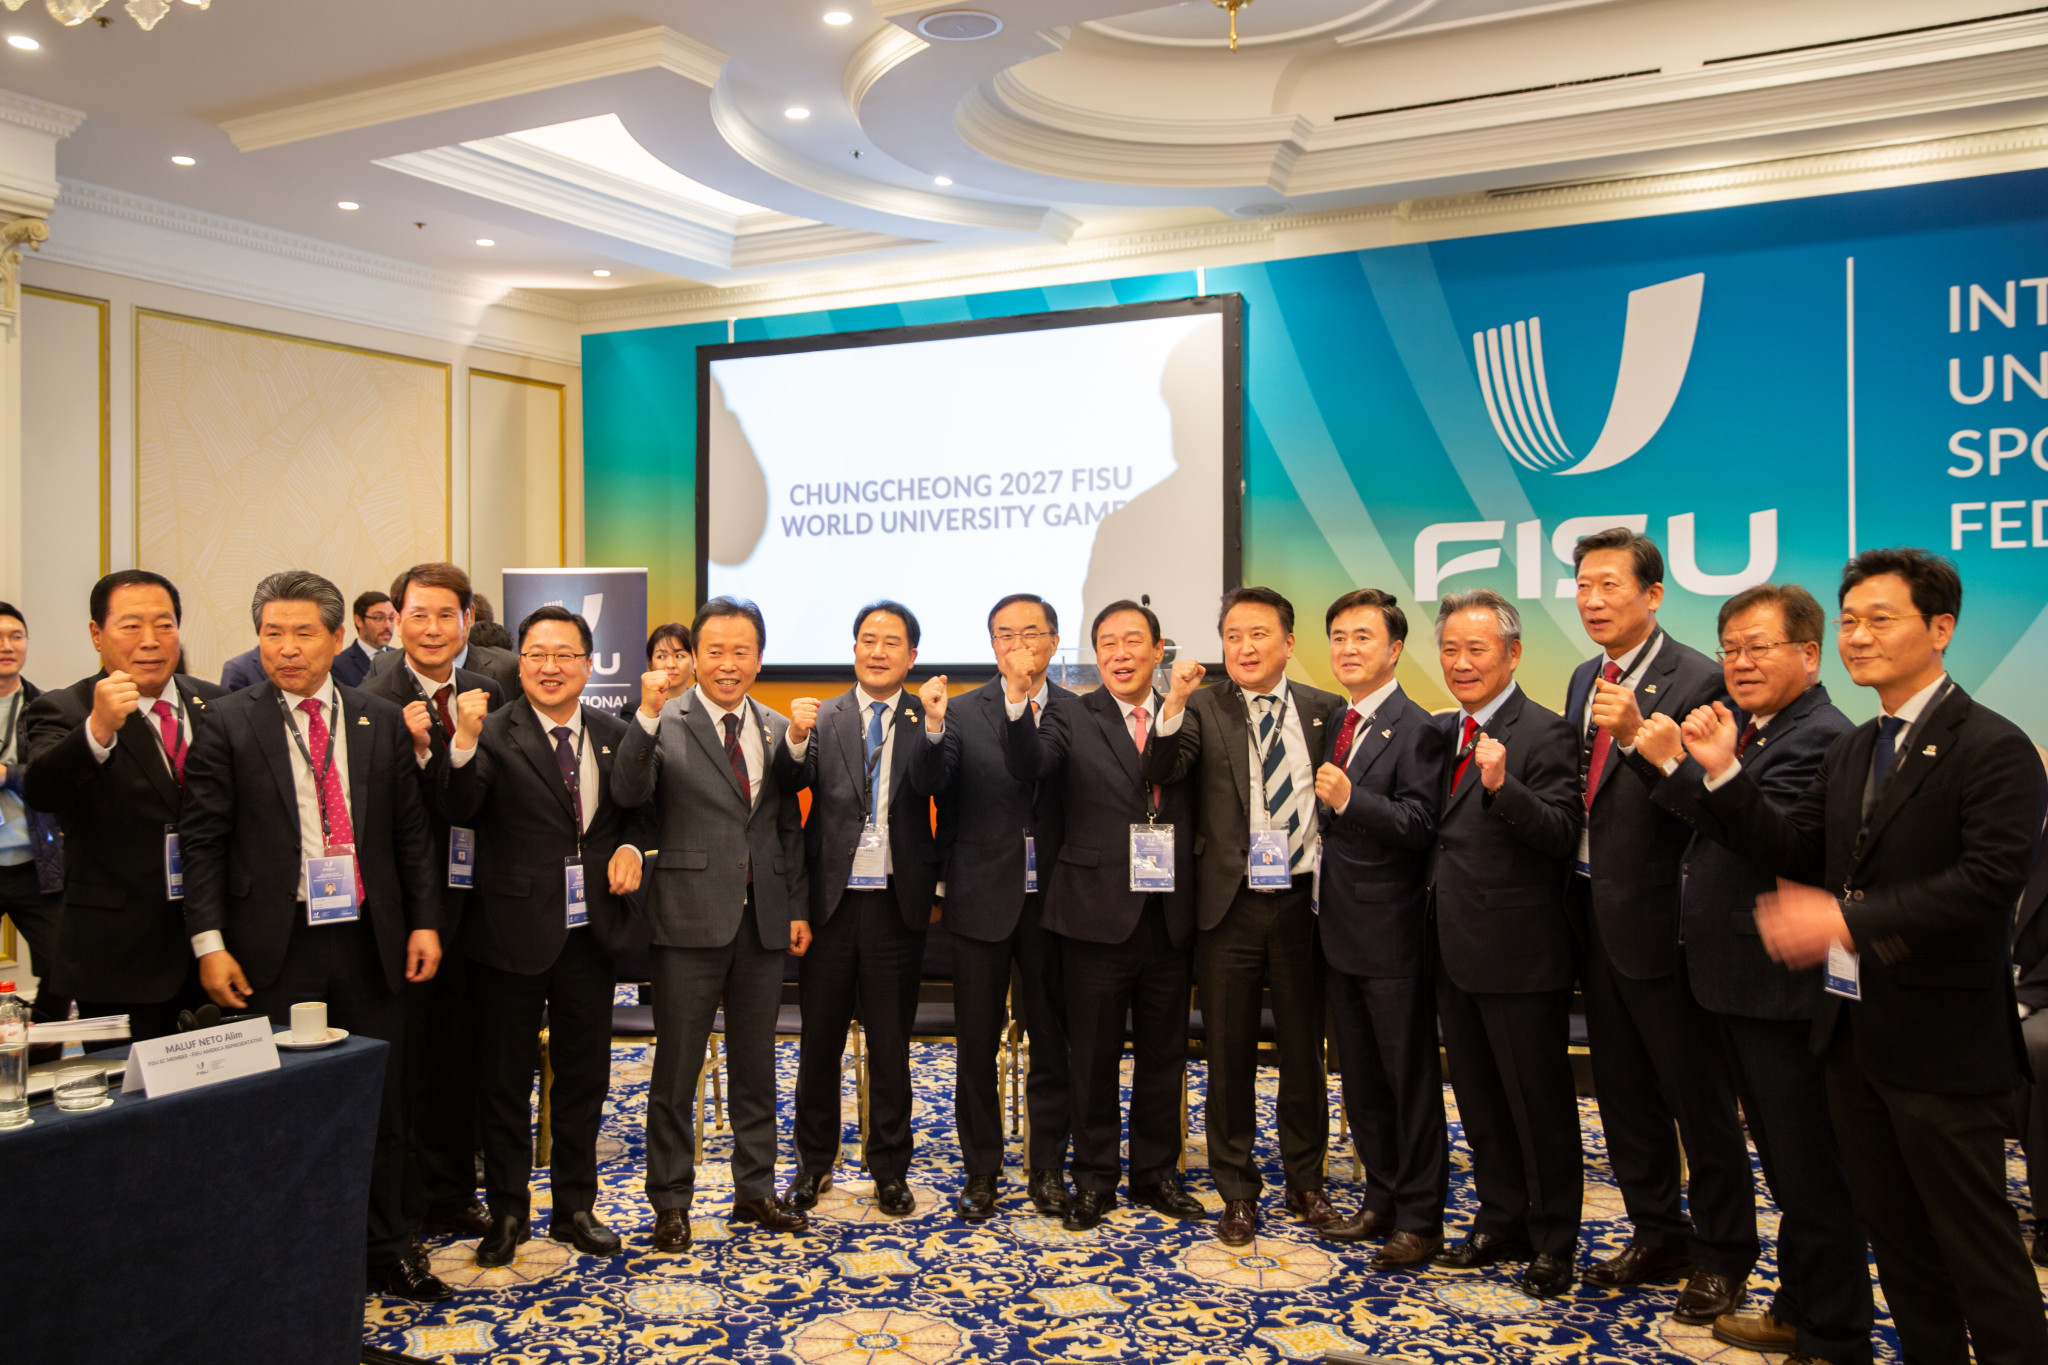 South Korea is set to hold the FISU World University Games for the third time in Chungcheong in 2027 ©FISU